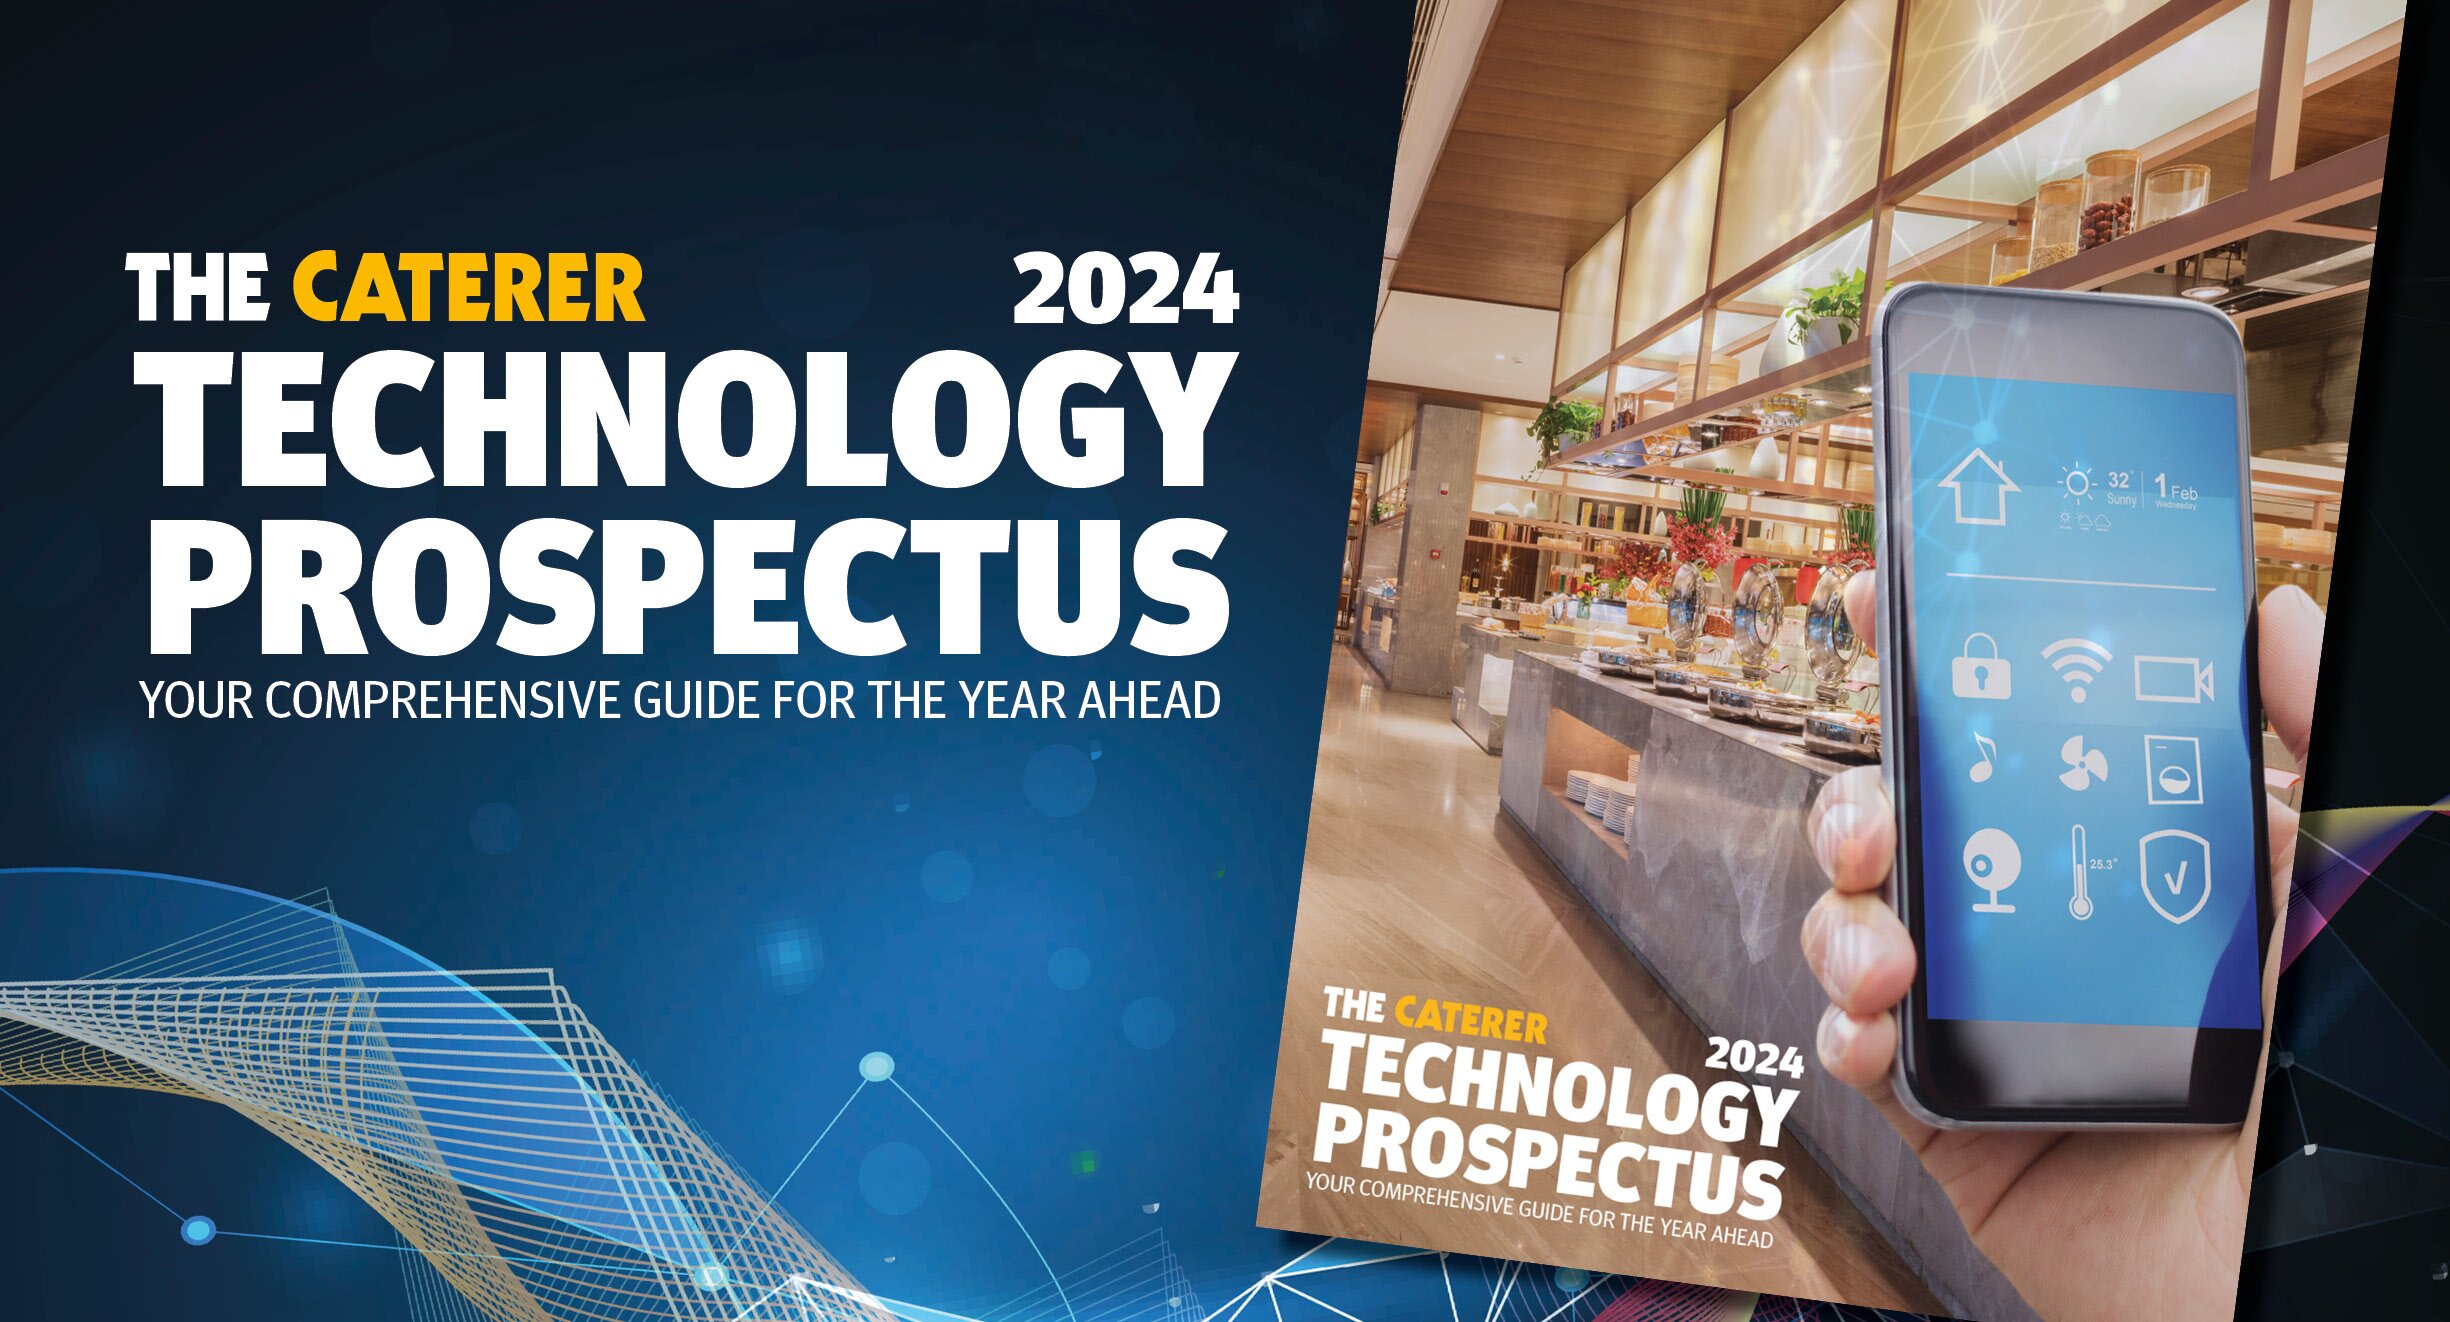 Download The Caterer's Technology Prospectus 2024